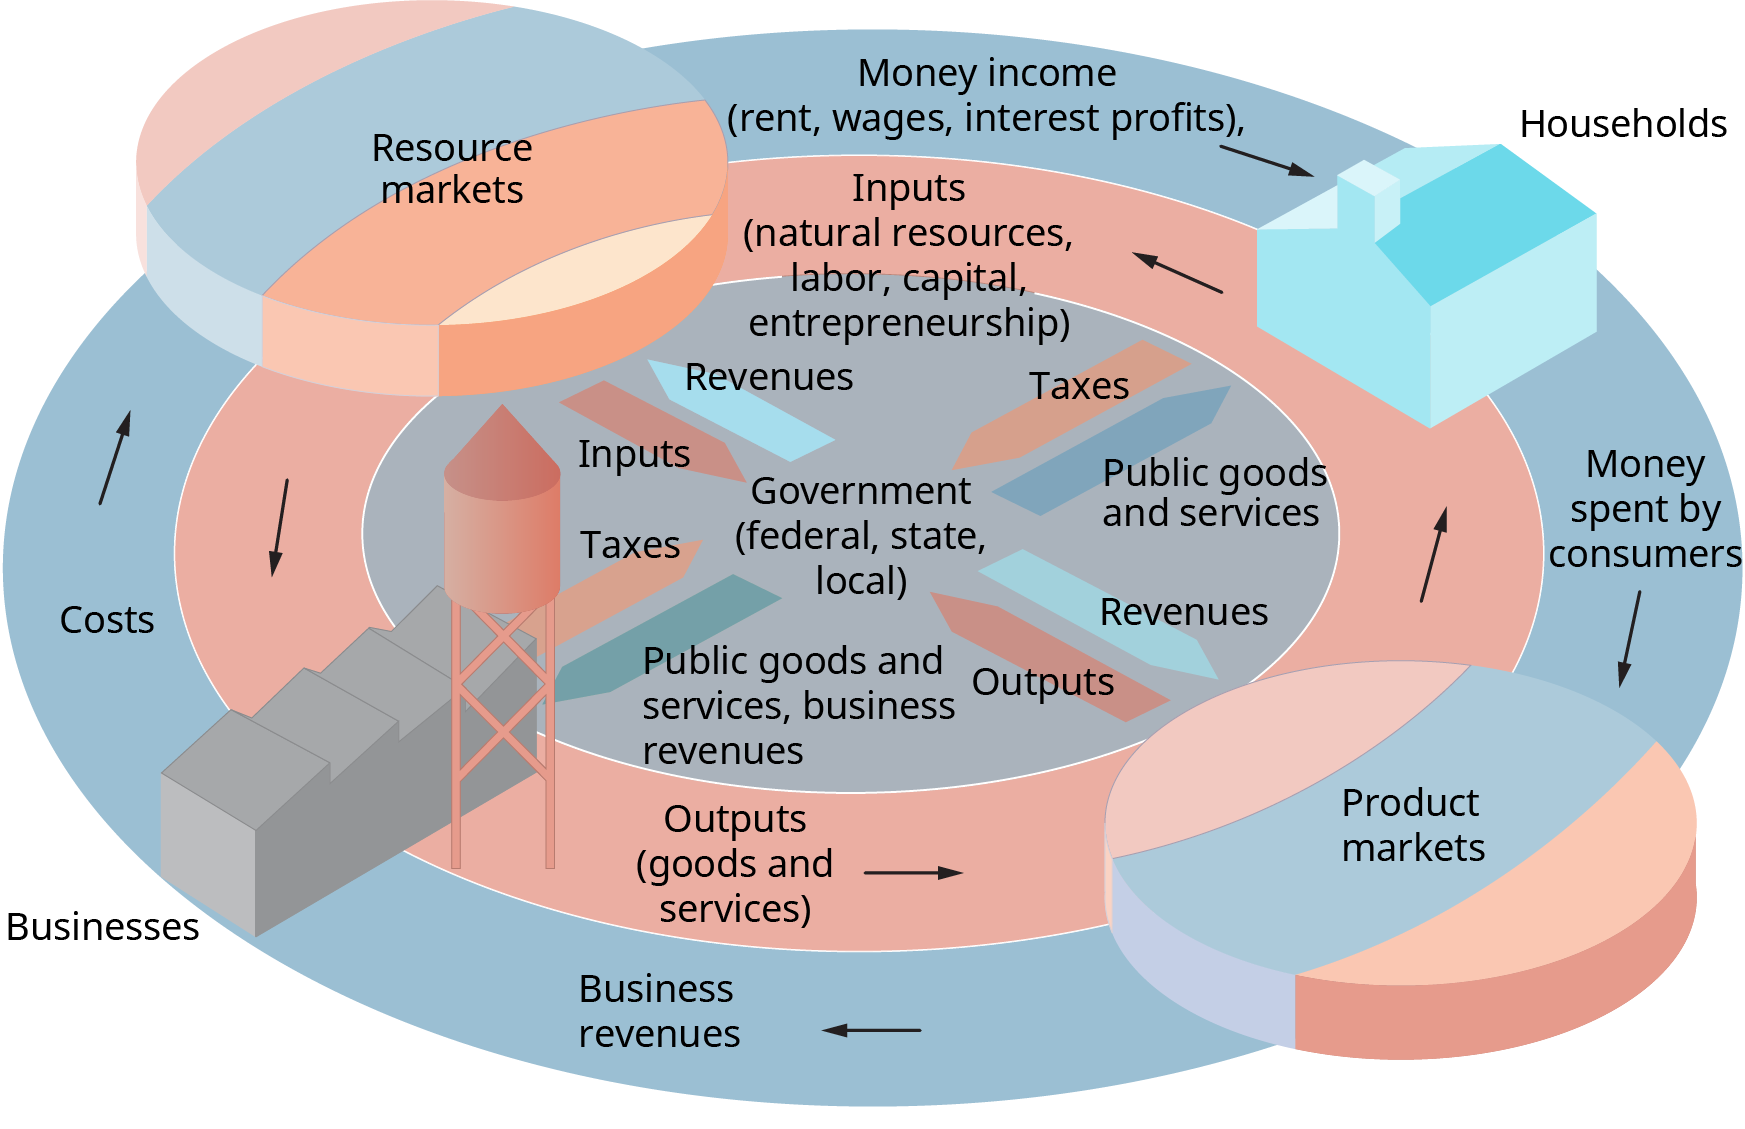 The diagram is a circle, with a labeled core. There is a band surrounding the core, and an outer band surrounding both the core and inner band. The outward flow of the outer band is labeled as follows. Money income, such as rent, wages, and interest profits, goes into households. Money is then spent by consumers in product markets. This flows into business revenues, which flows into costs, then into resource markets. Next is the inner band, which is labeled as follows. The resource markets outputs, such goods and services, flows into inputs, such as natural resources, labor, capital, and entrepreneurship. In the center of the core is labeled Government, federal, state and local. Arrows pointing inward and outward are in pairs and are labeled. From the resource markets, In arrow, inputs; out arrow revenues. From the households, In arrow taxes; out arrow public goods and services. From the product markets, in arrow outputs; out arrow revenues. From businesses, in arrow taxes; out arrow public goods and services, business revenues.